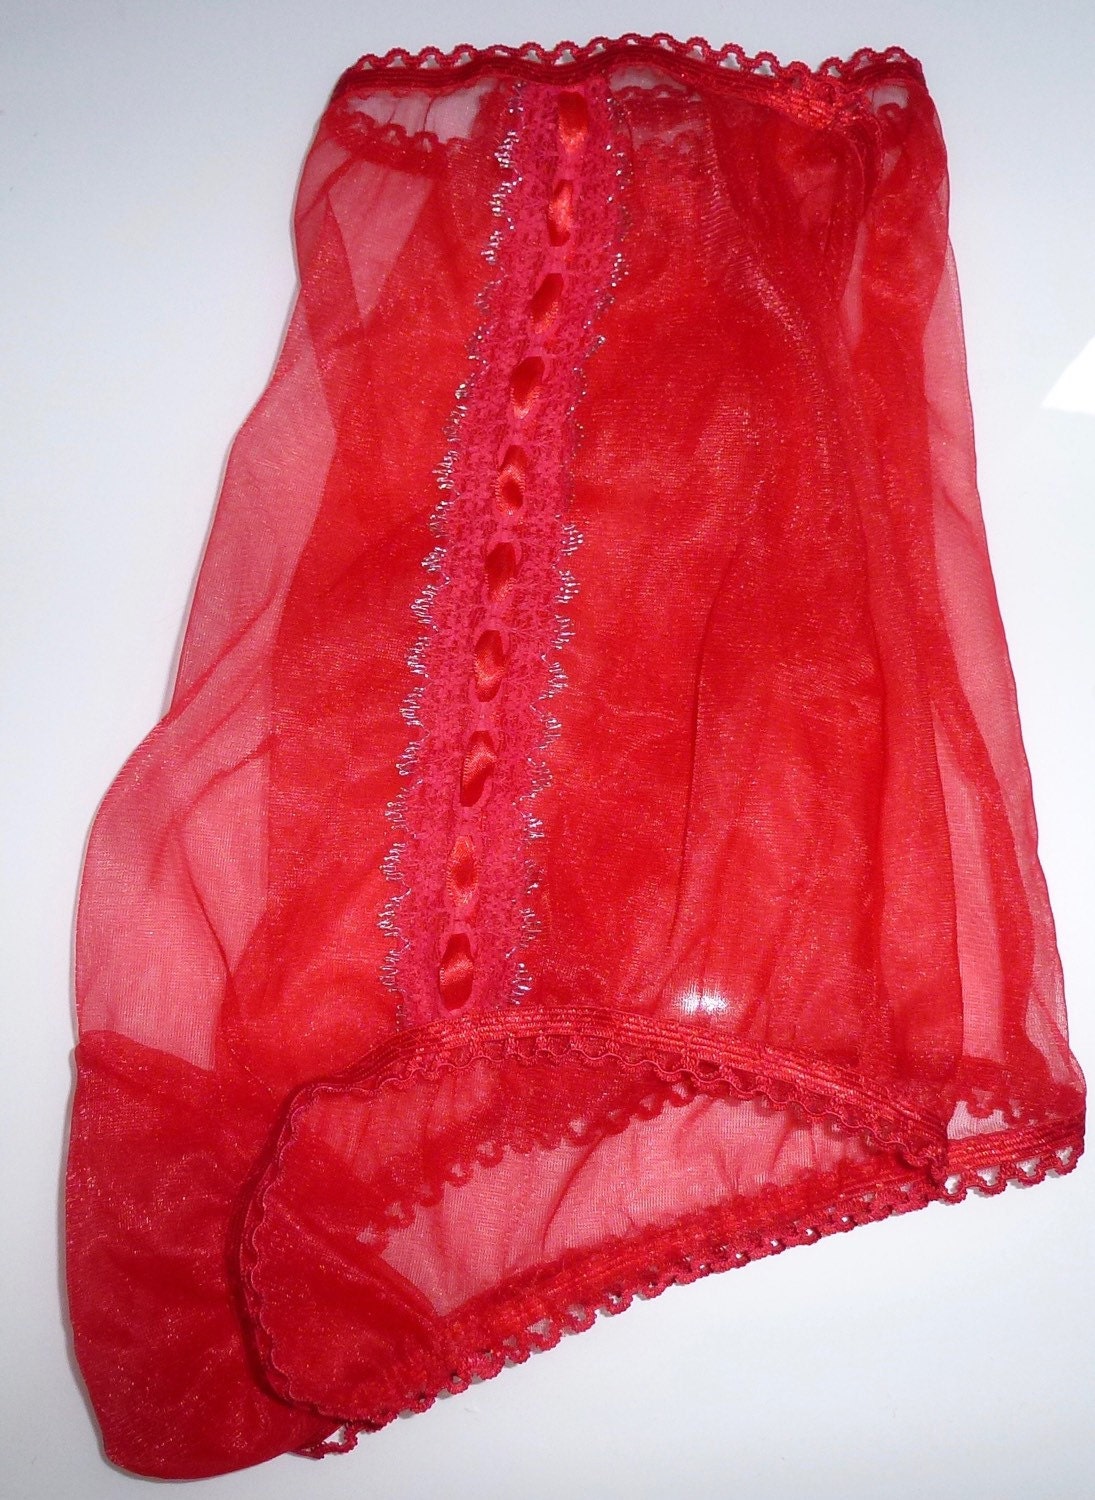 sheer nylon and lace panties vintage style